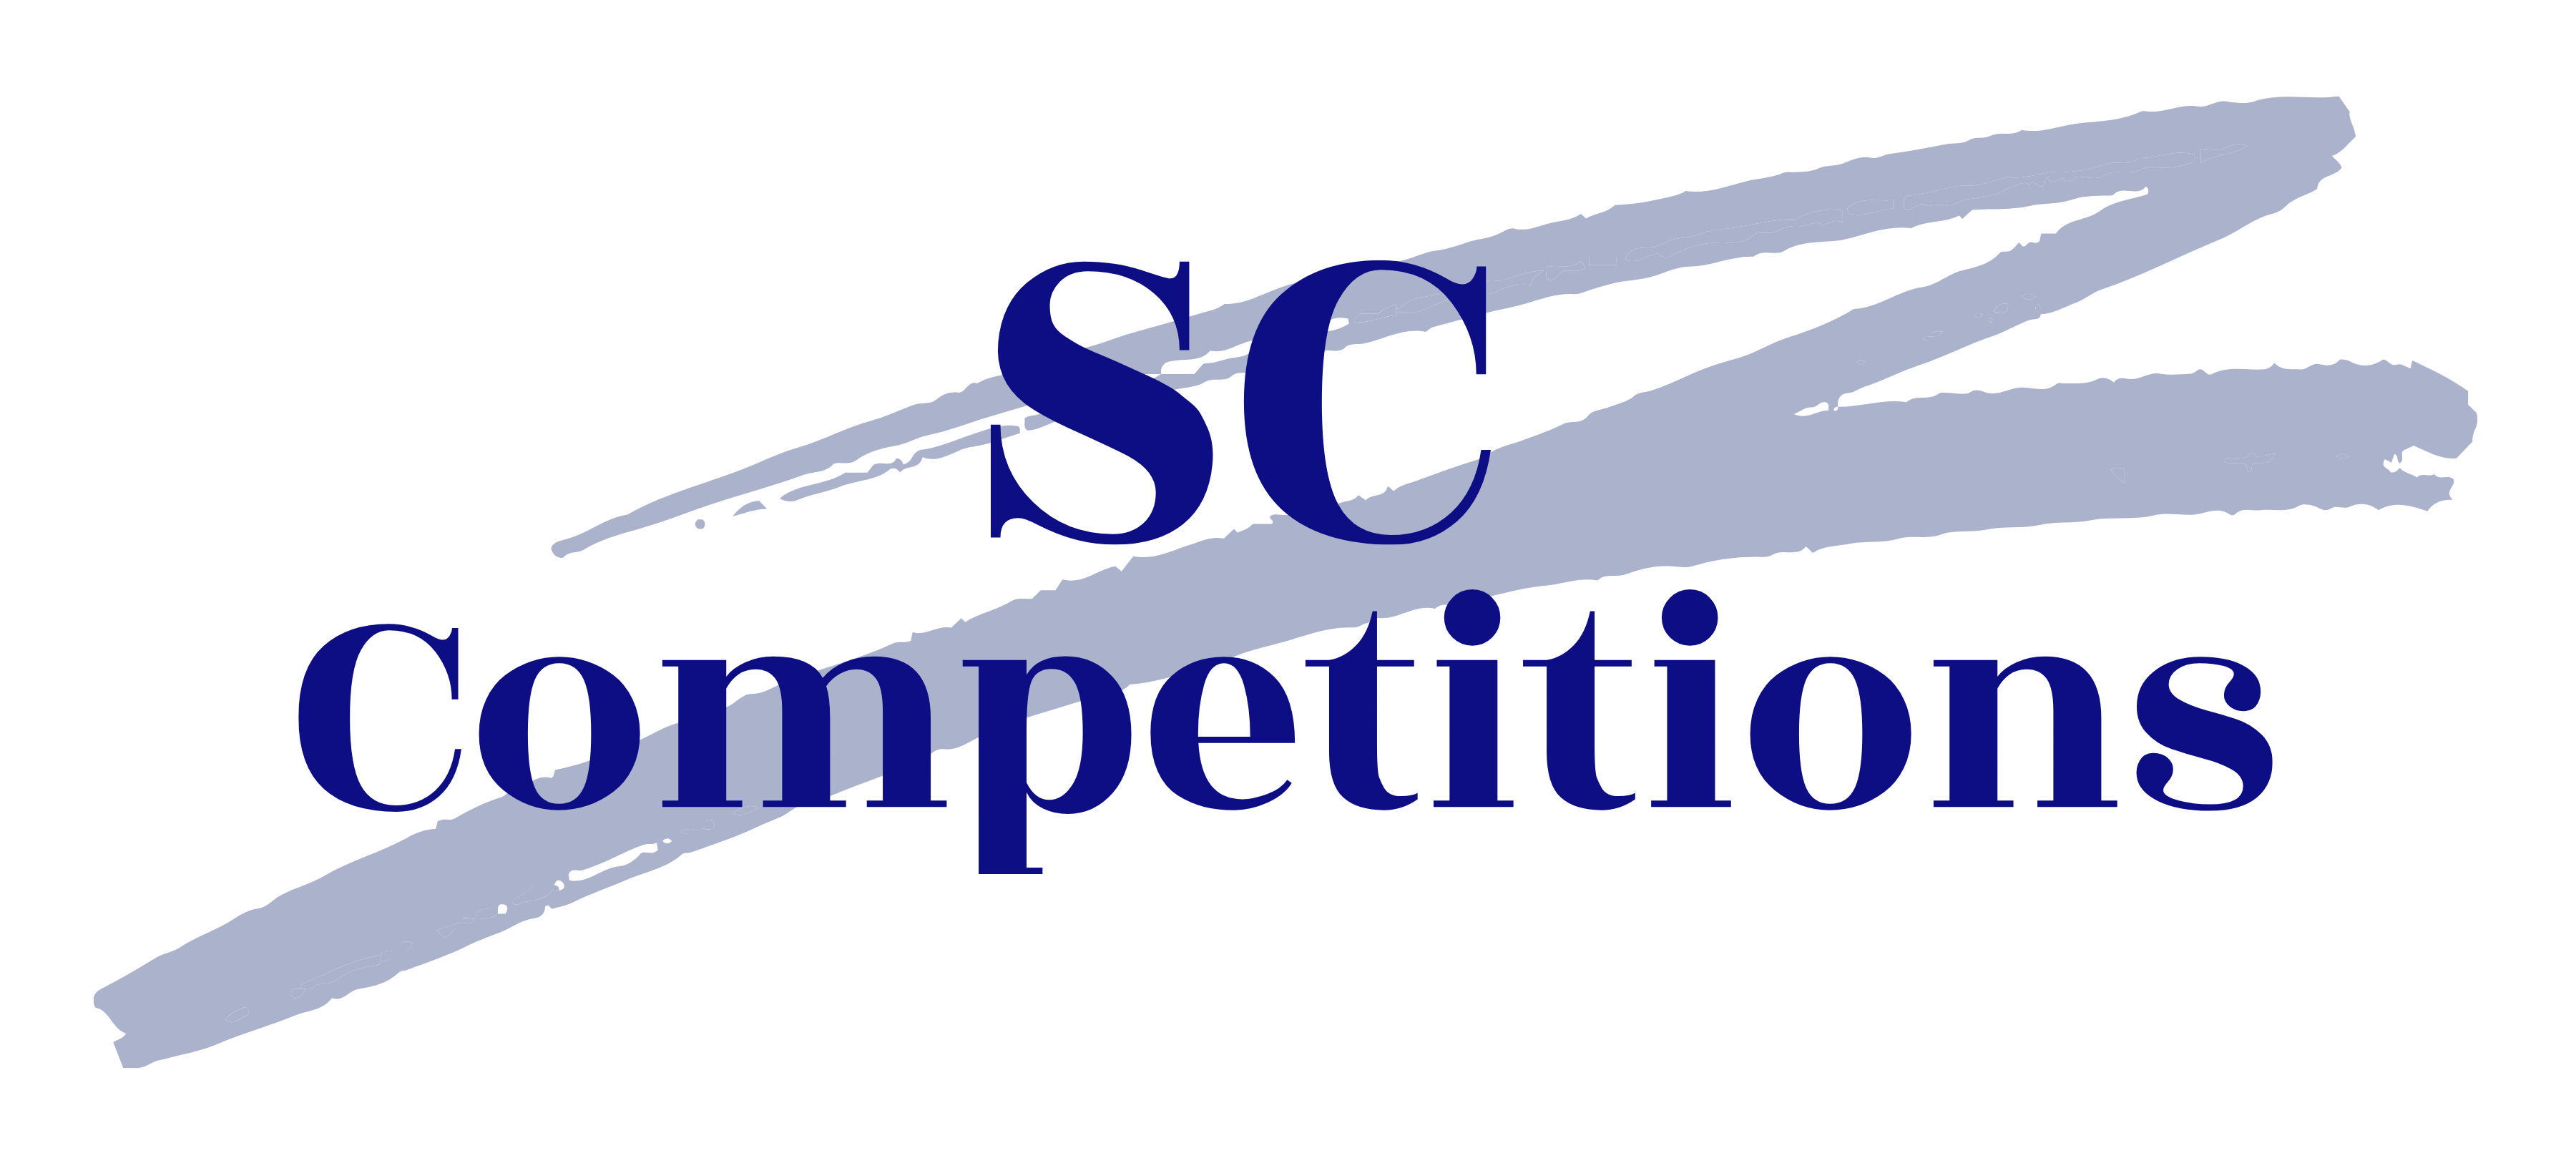 SC Competitions